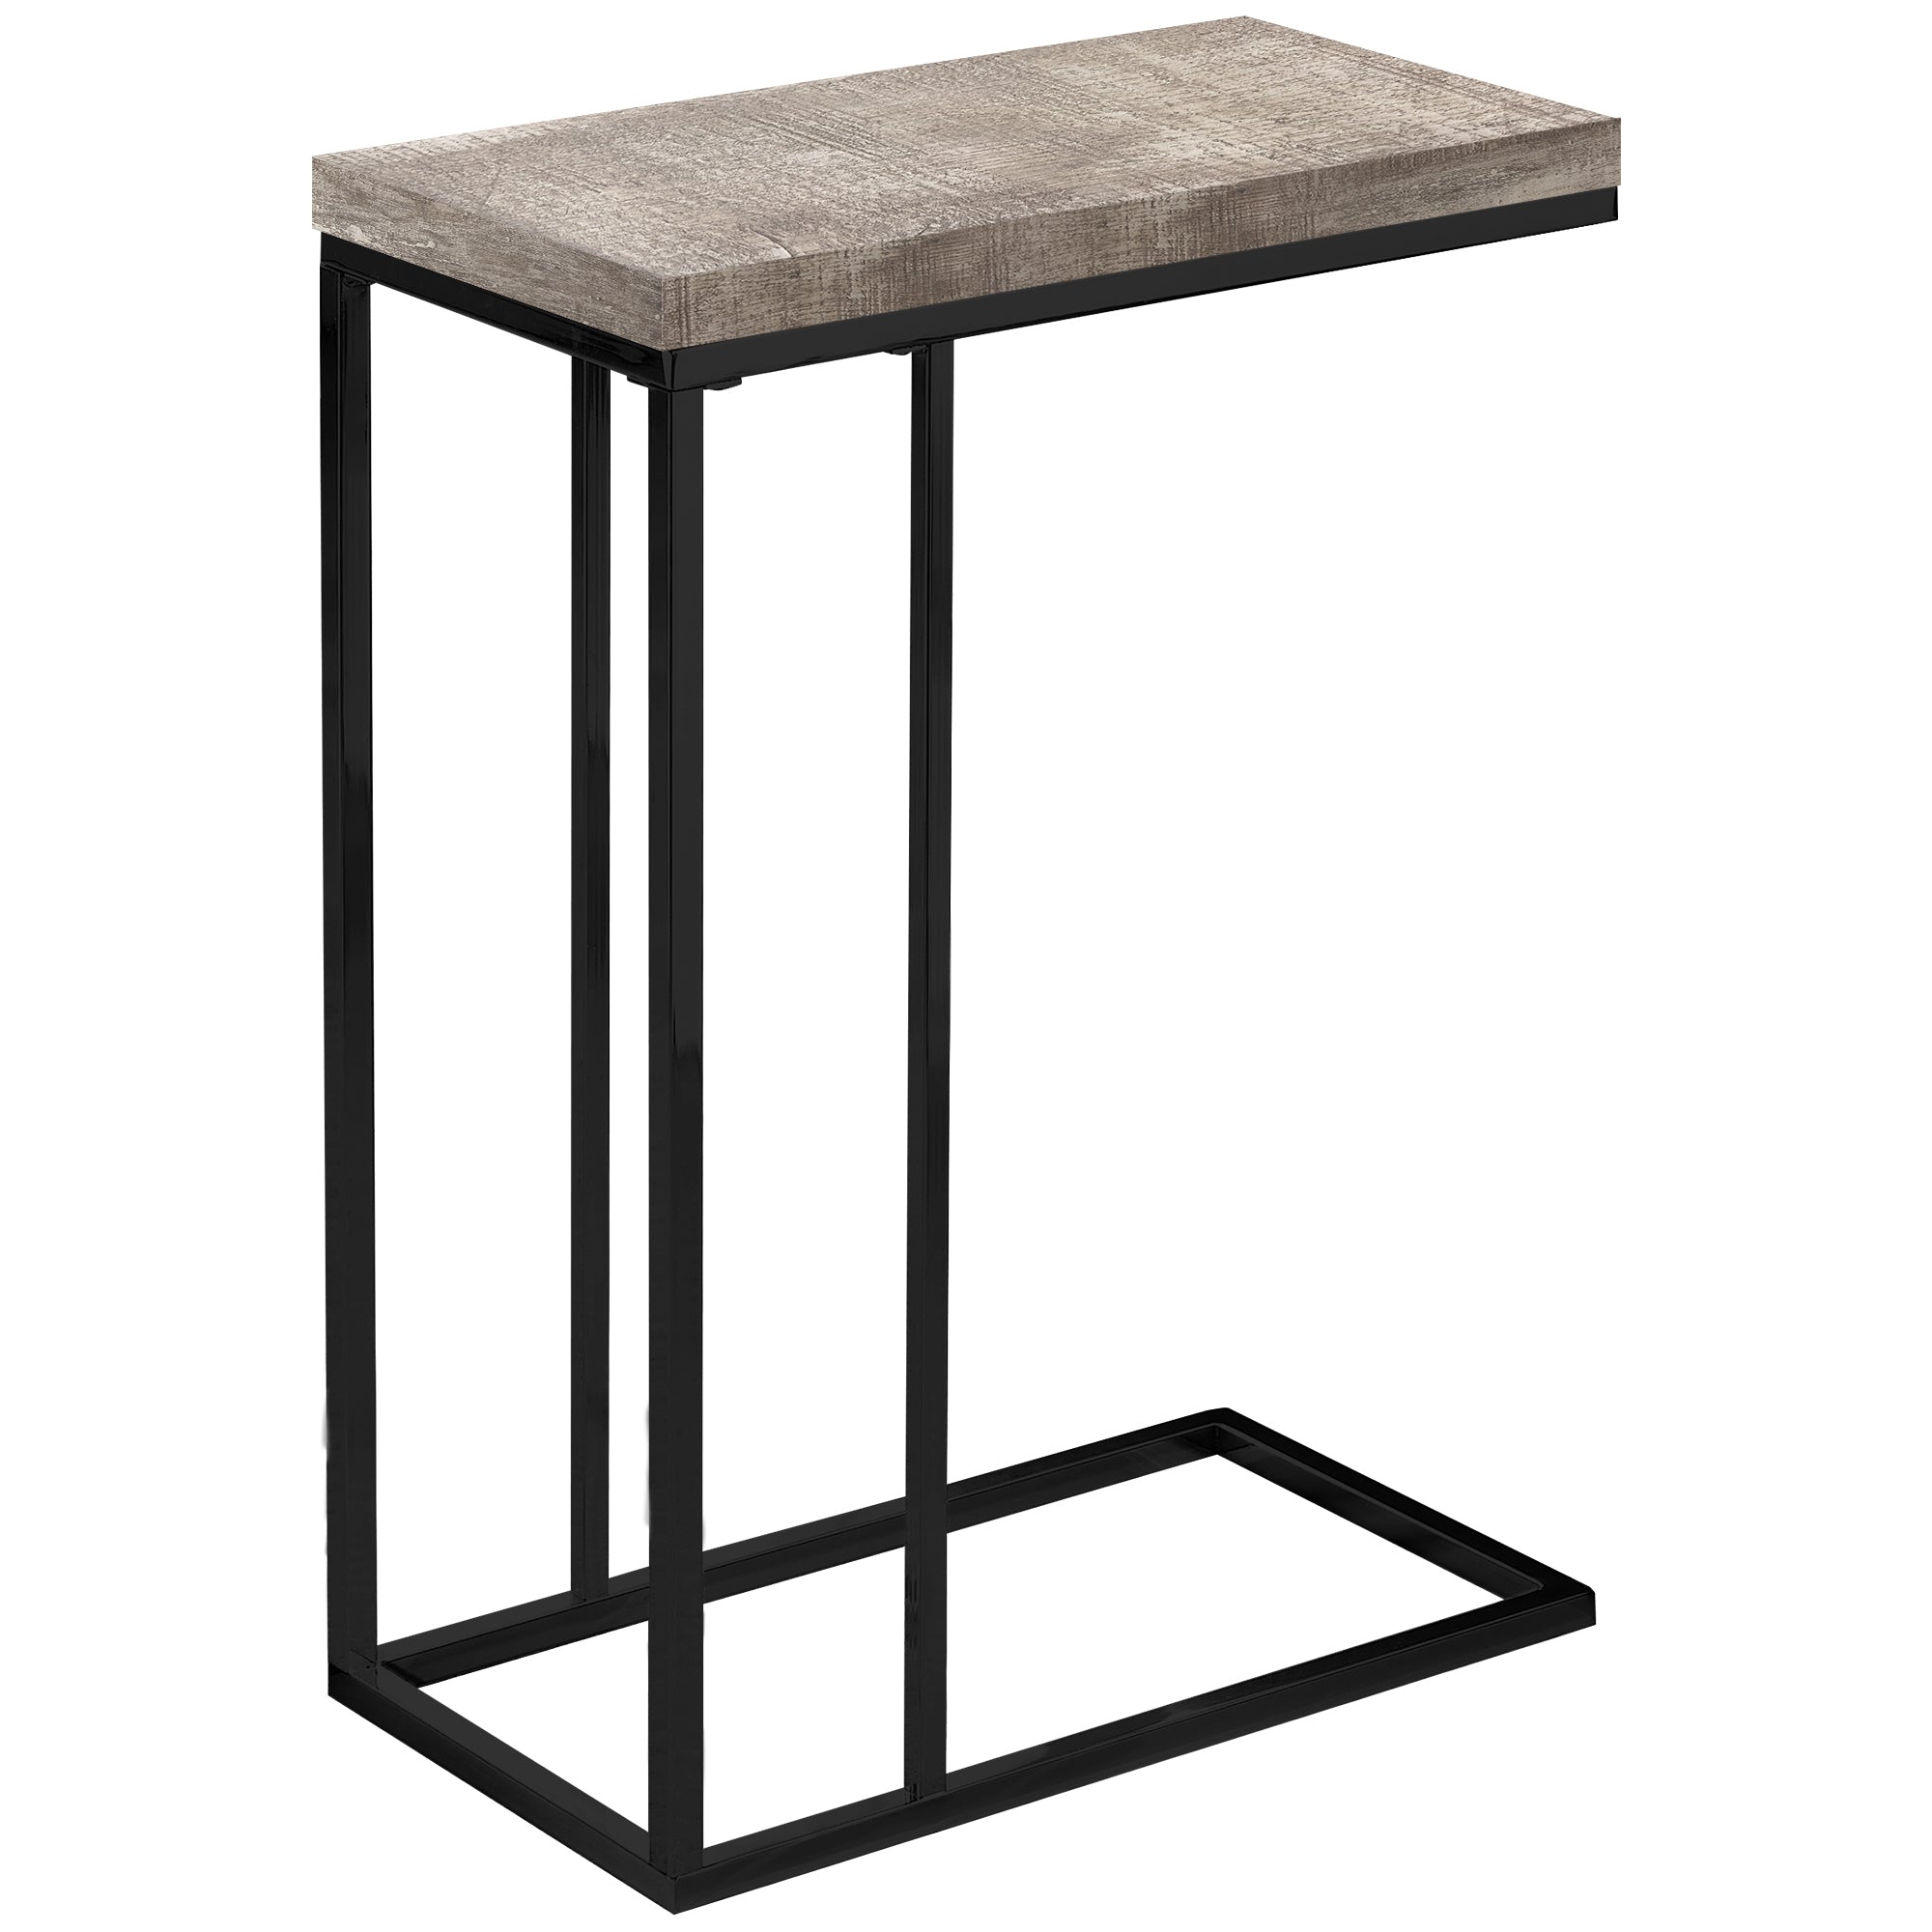 MN-483405    Accent Table, C-Shaped, End, Side, Snack, Living Room, Bedroom, Metal Legs, Laminate, Taupe Reclaimed Wood Look, Black, Contemporary, Modern